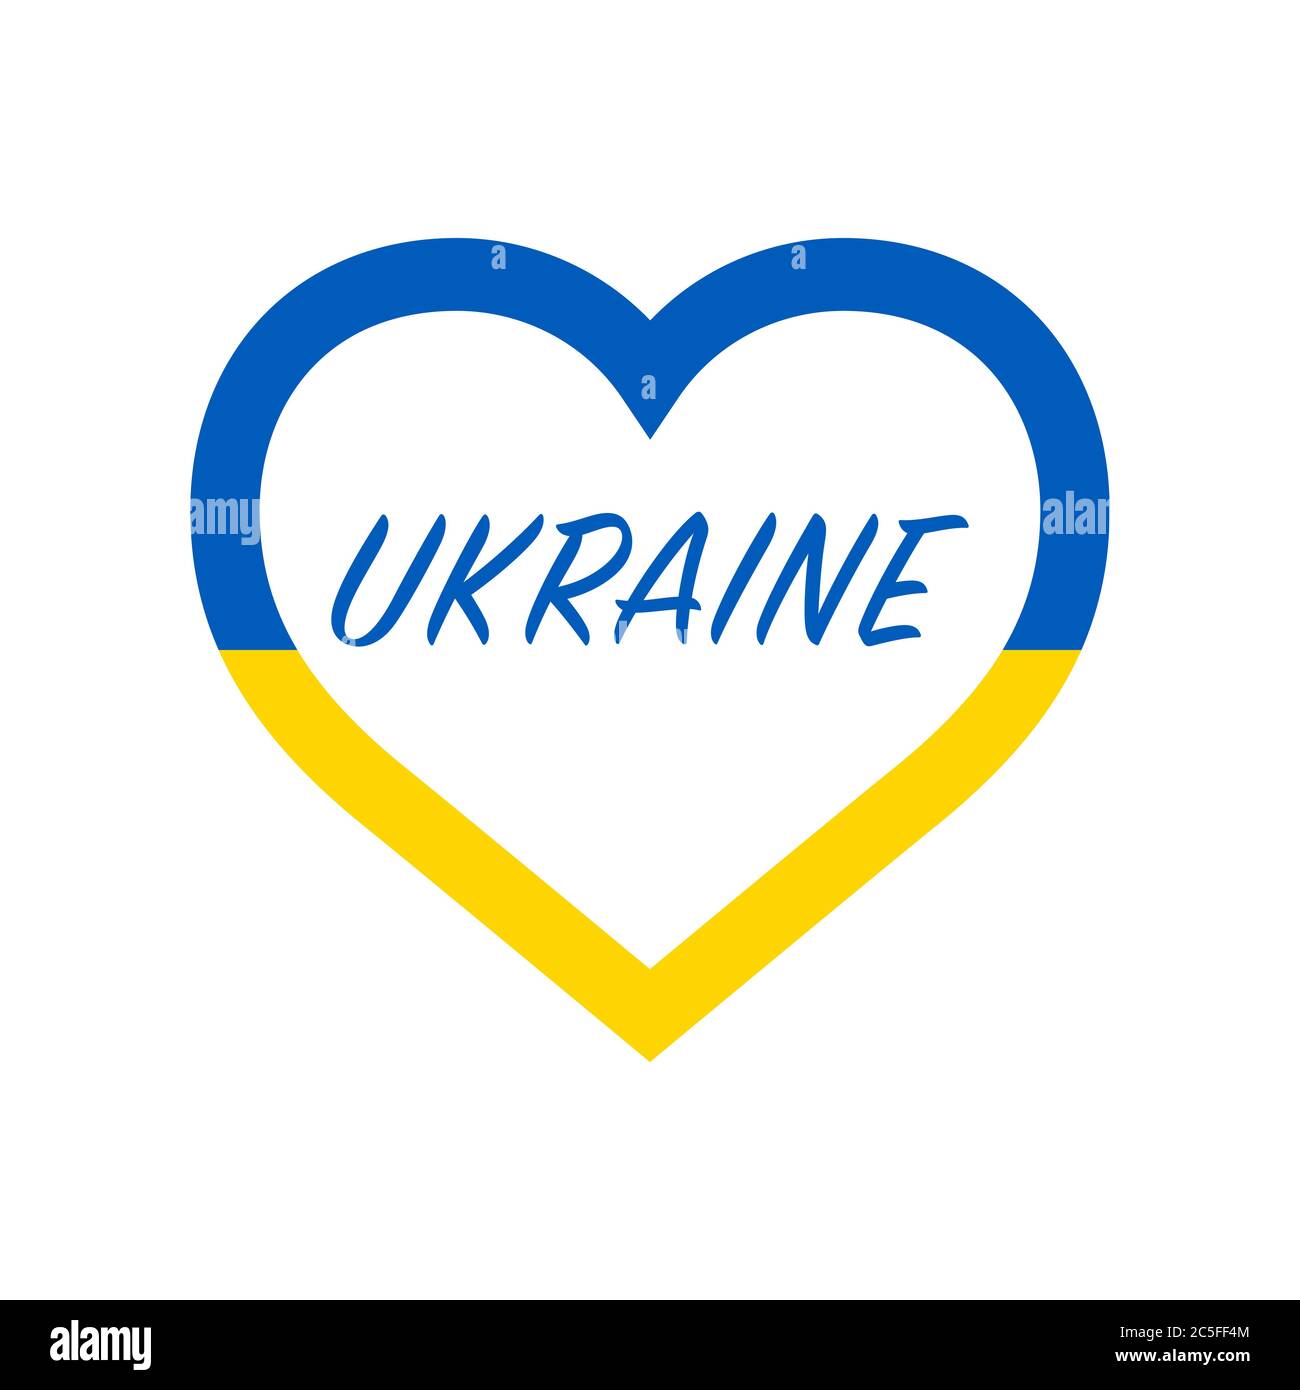 Ukraine flag in heart. I love my country. sign. Stock vector illustration isolated on white background. Stock Vector